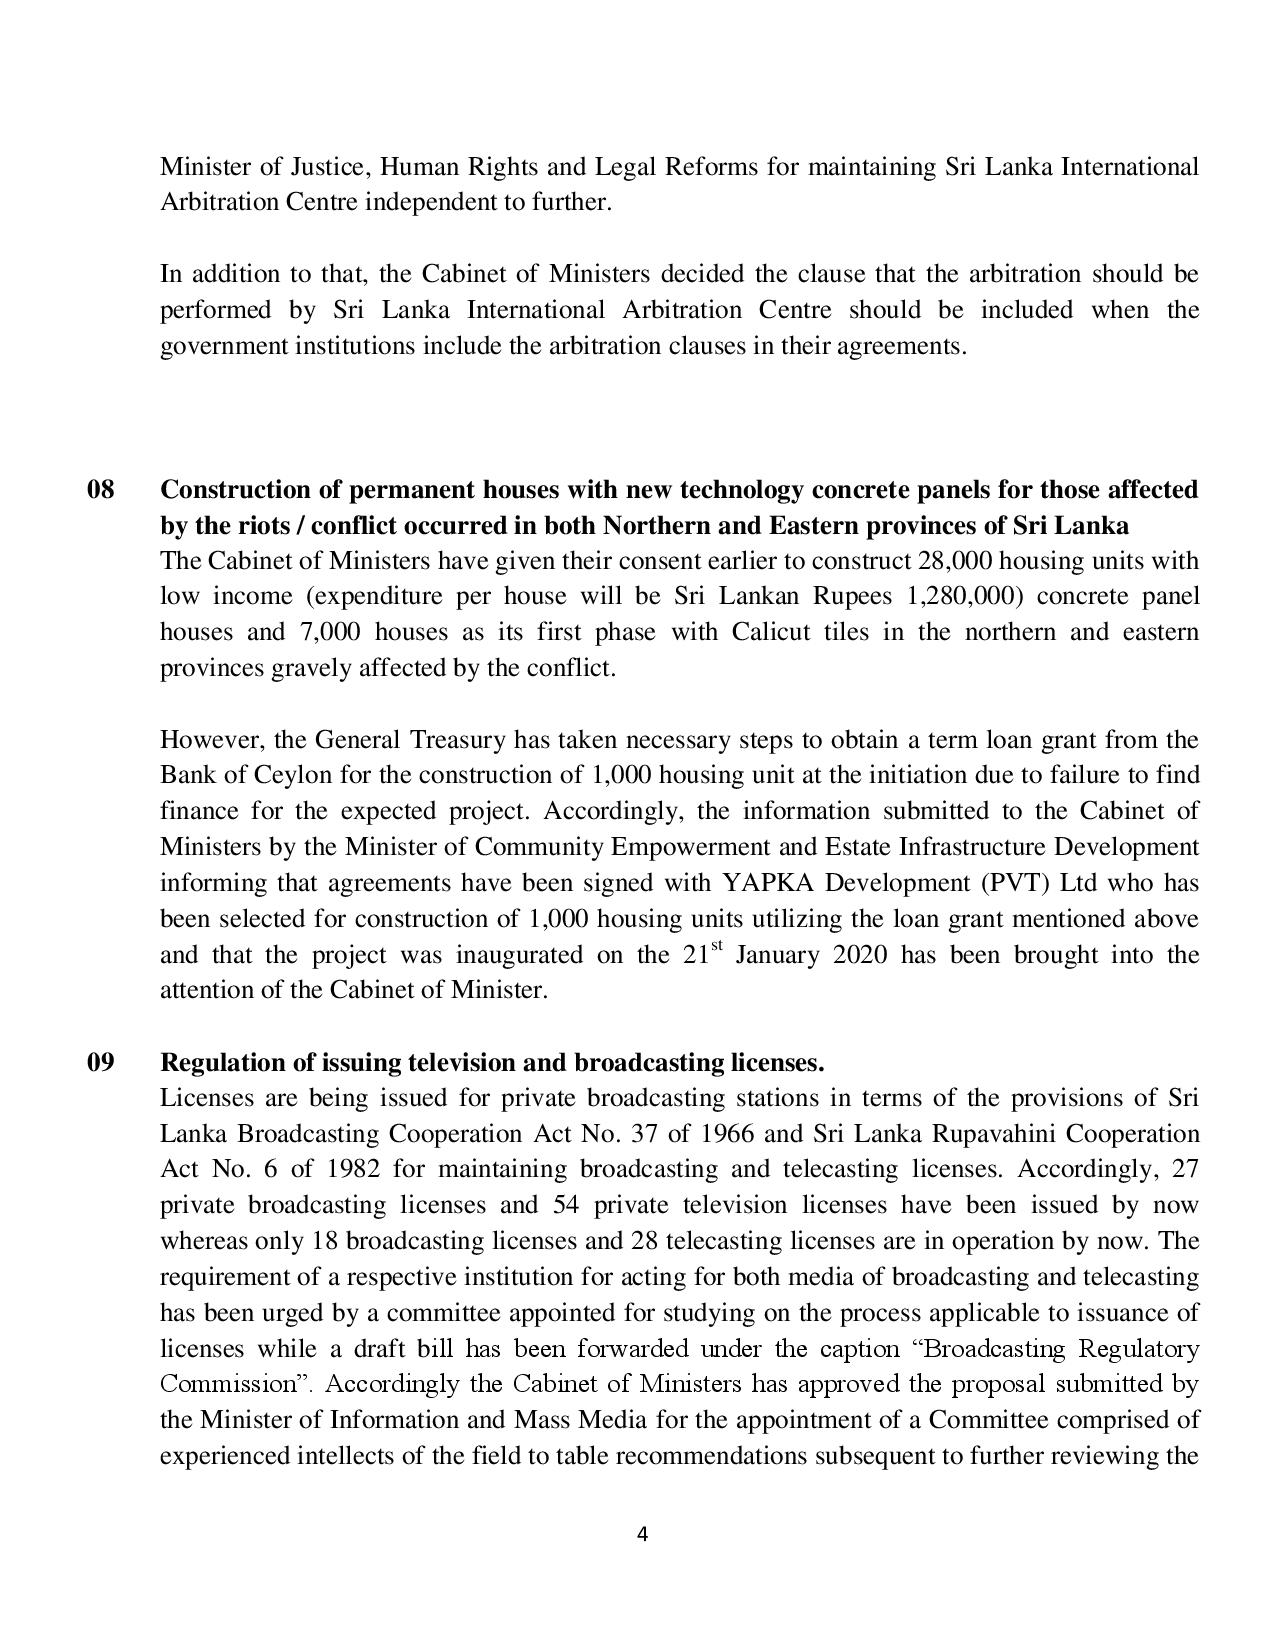 4 Cabinet Decisions on 04.03.2020 E page 004